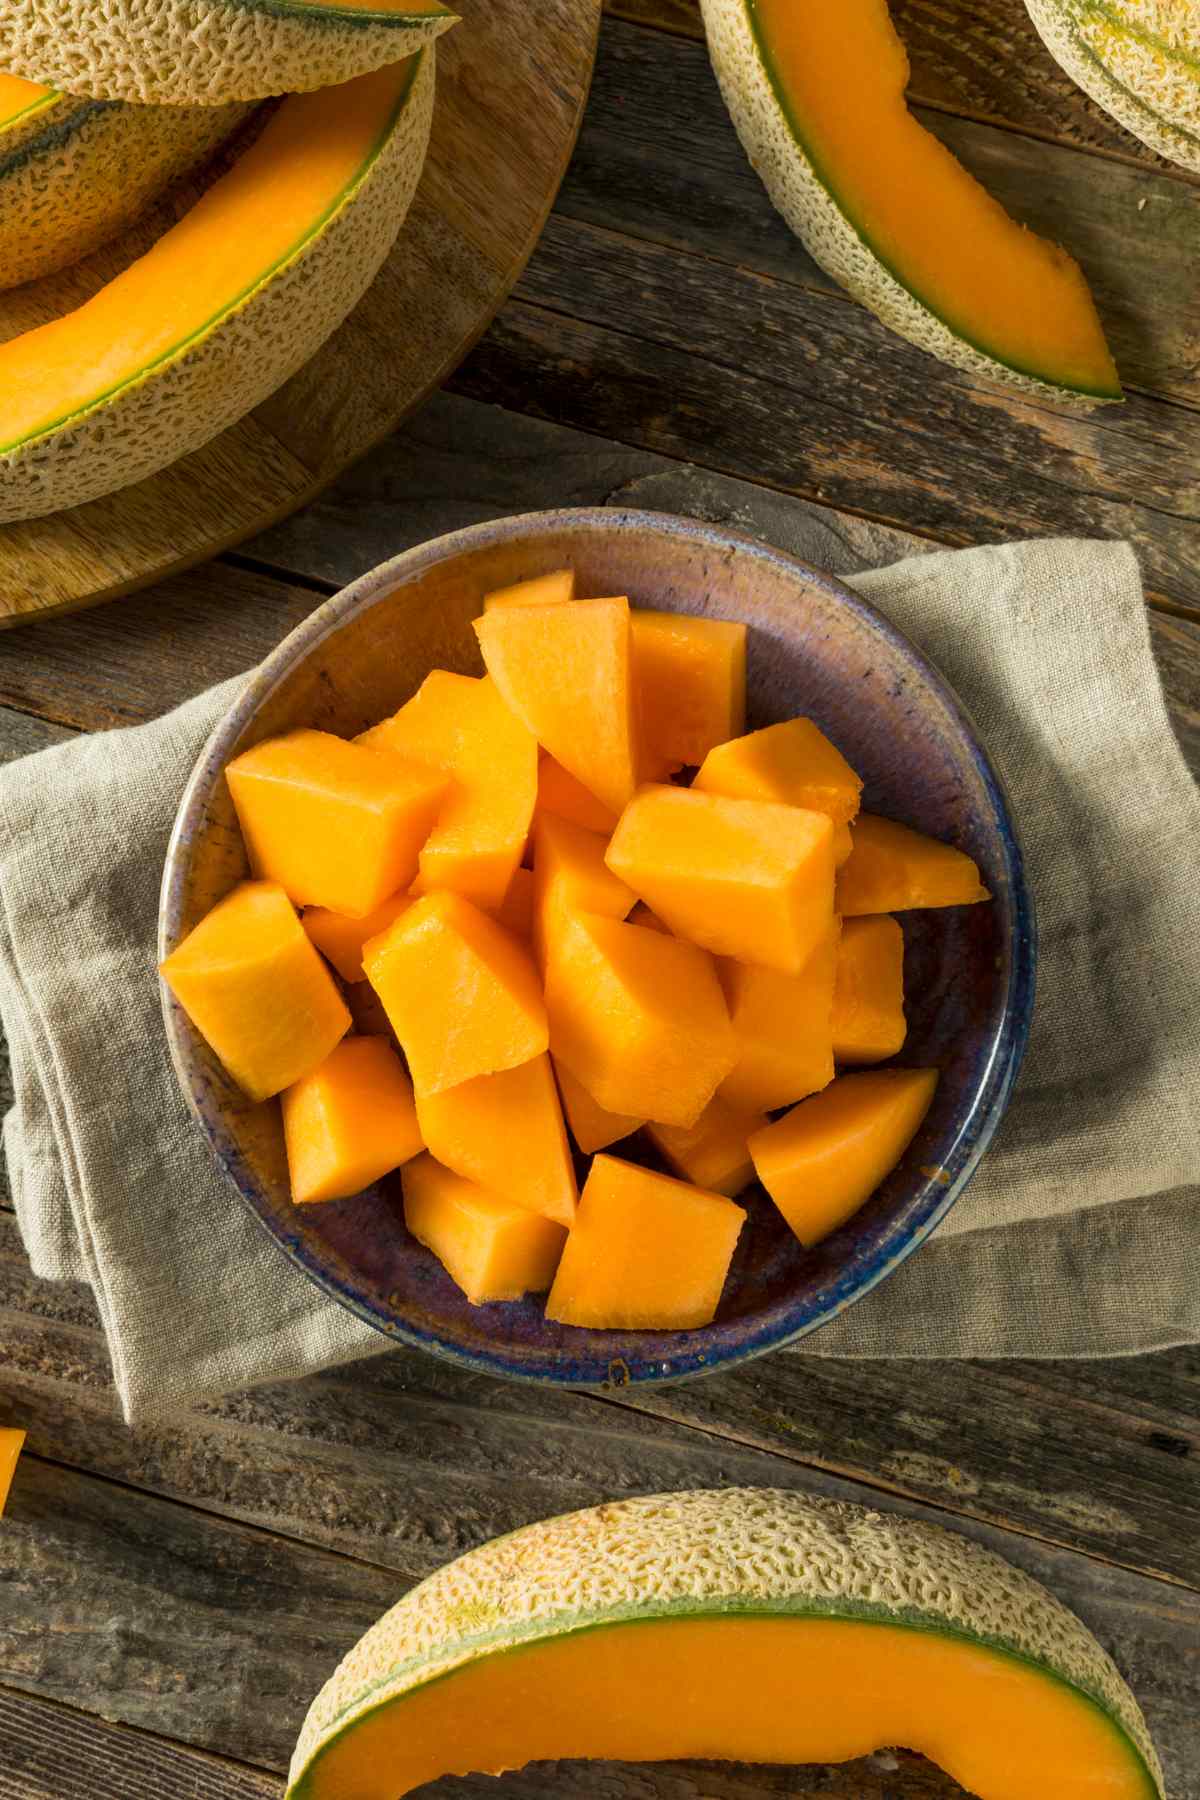 Figuring out what to eat on your keto diet is the first step to ensuring success with your new lifestyle. Is cantaloupe good to eat when you’re following a ketogenic diet? How many carbs does it have? Fruits can be a healthy addition to your keto diet, but the quantity of certain kinds of fruits and the carb count is important to keep in mind.